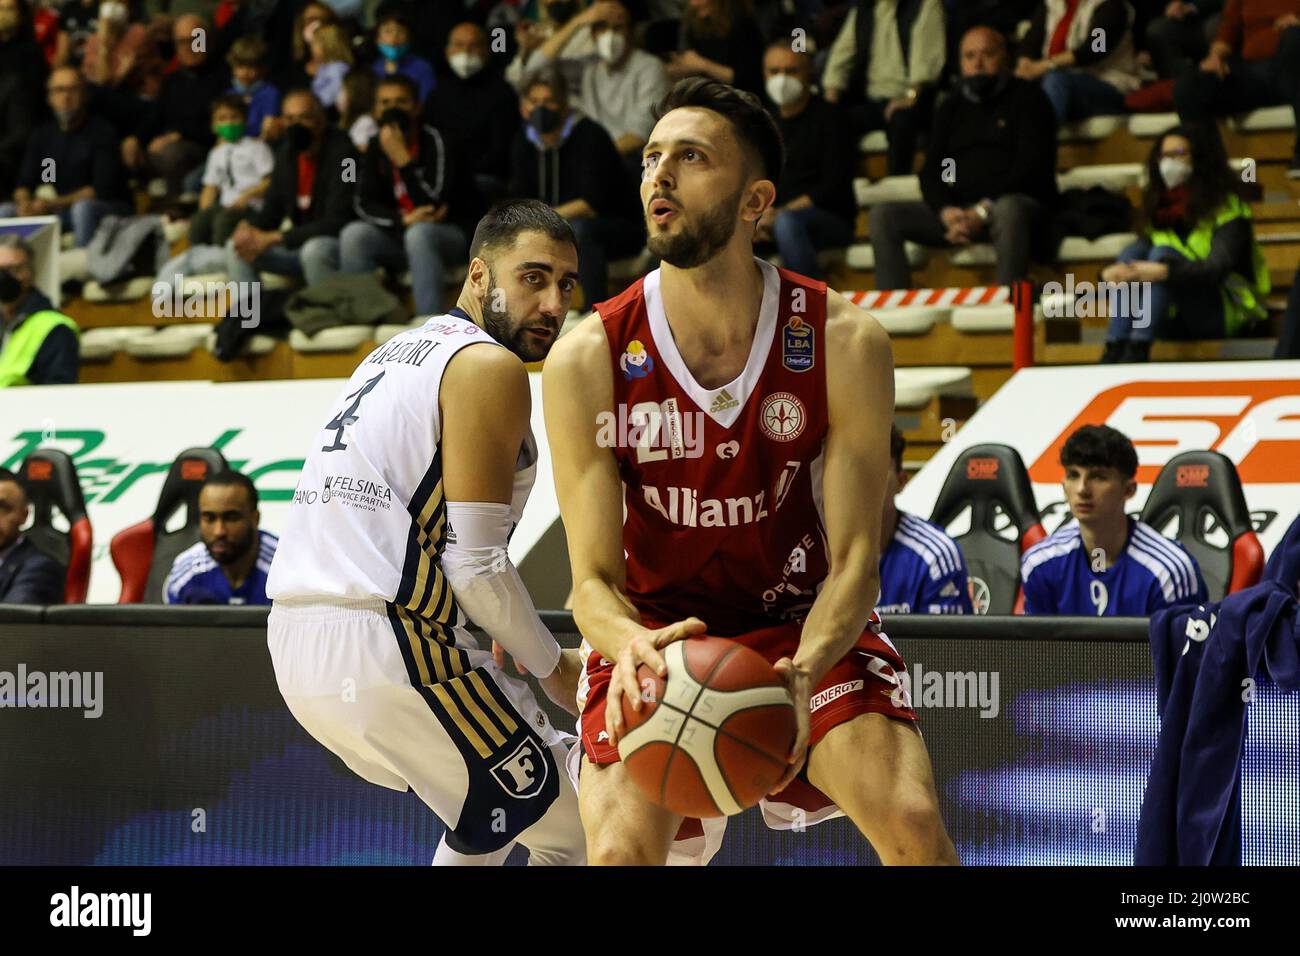 Luca Campogrande (Allianz Pallacanestro Trieste) during the Italian  Basketball A Serie Championship Allianz Pallacanestro Trieste vs Fortitudo  Bologna on marzo 20, 2022 at the Allianz Dome in Trieste, Italy (Photo by  Luca